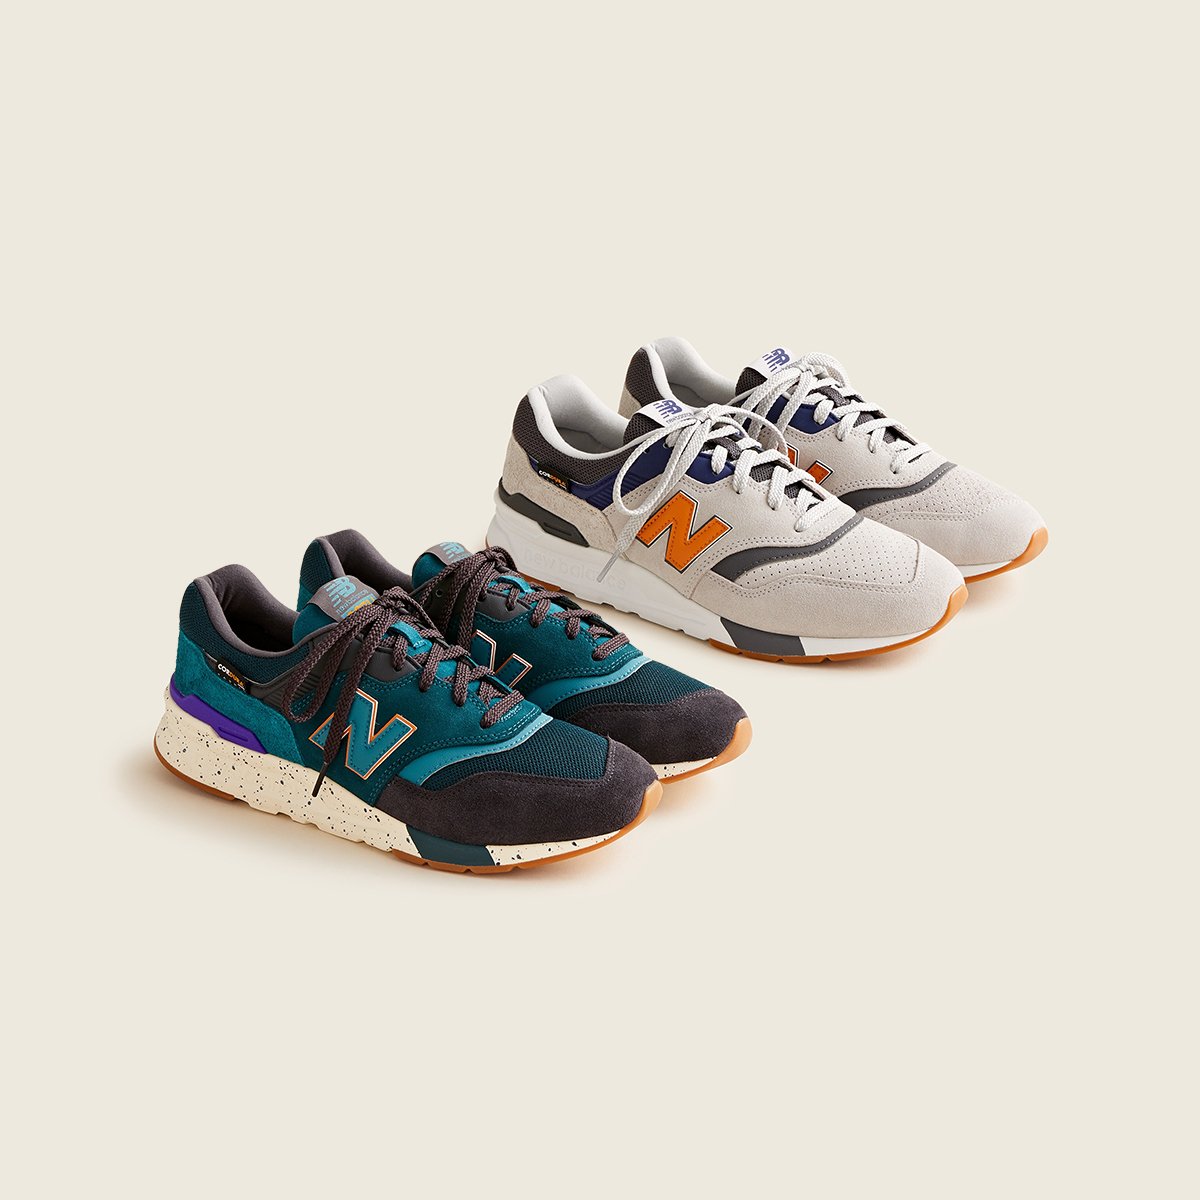 Silicon Lyrical tray Available Now // J.Crew x New Balance 997H Pack | HOUSE OF HEAT